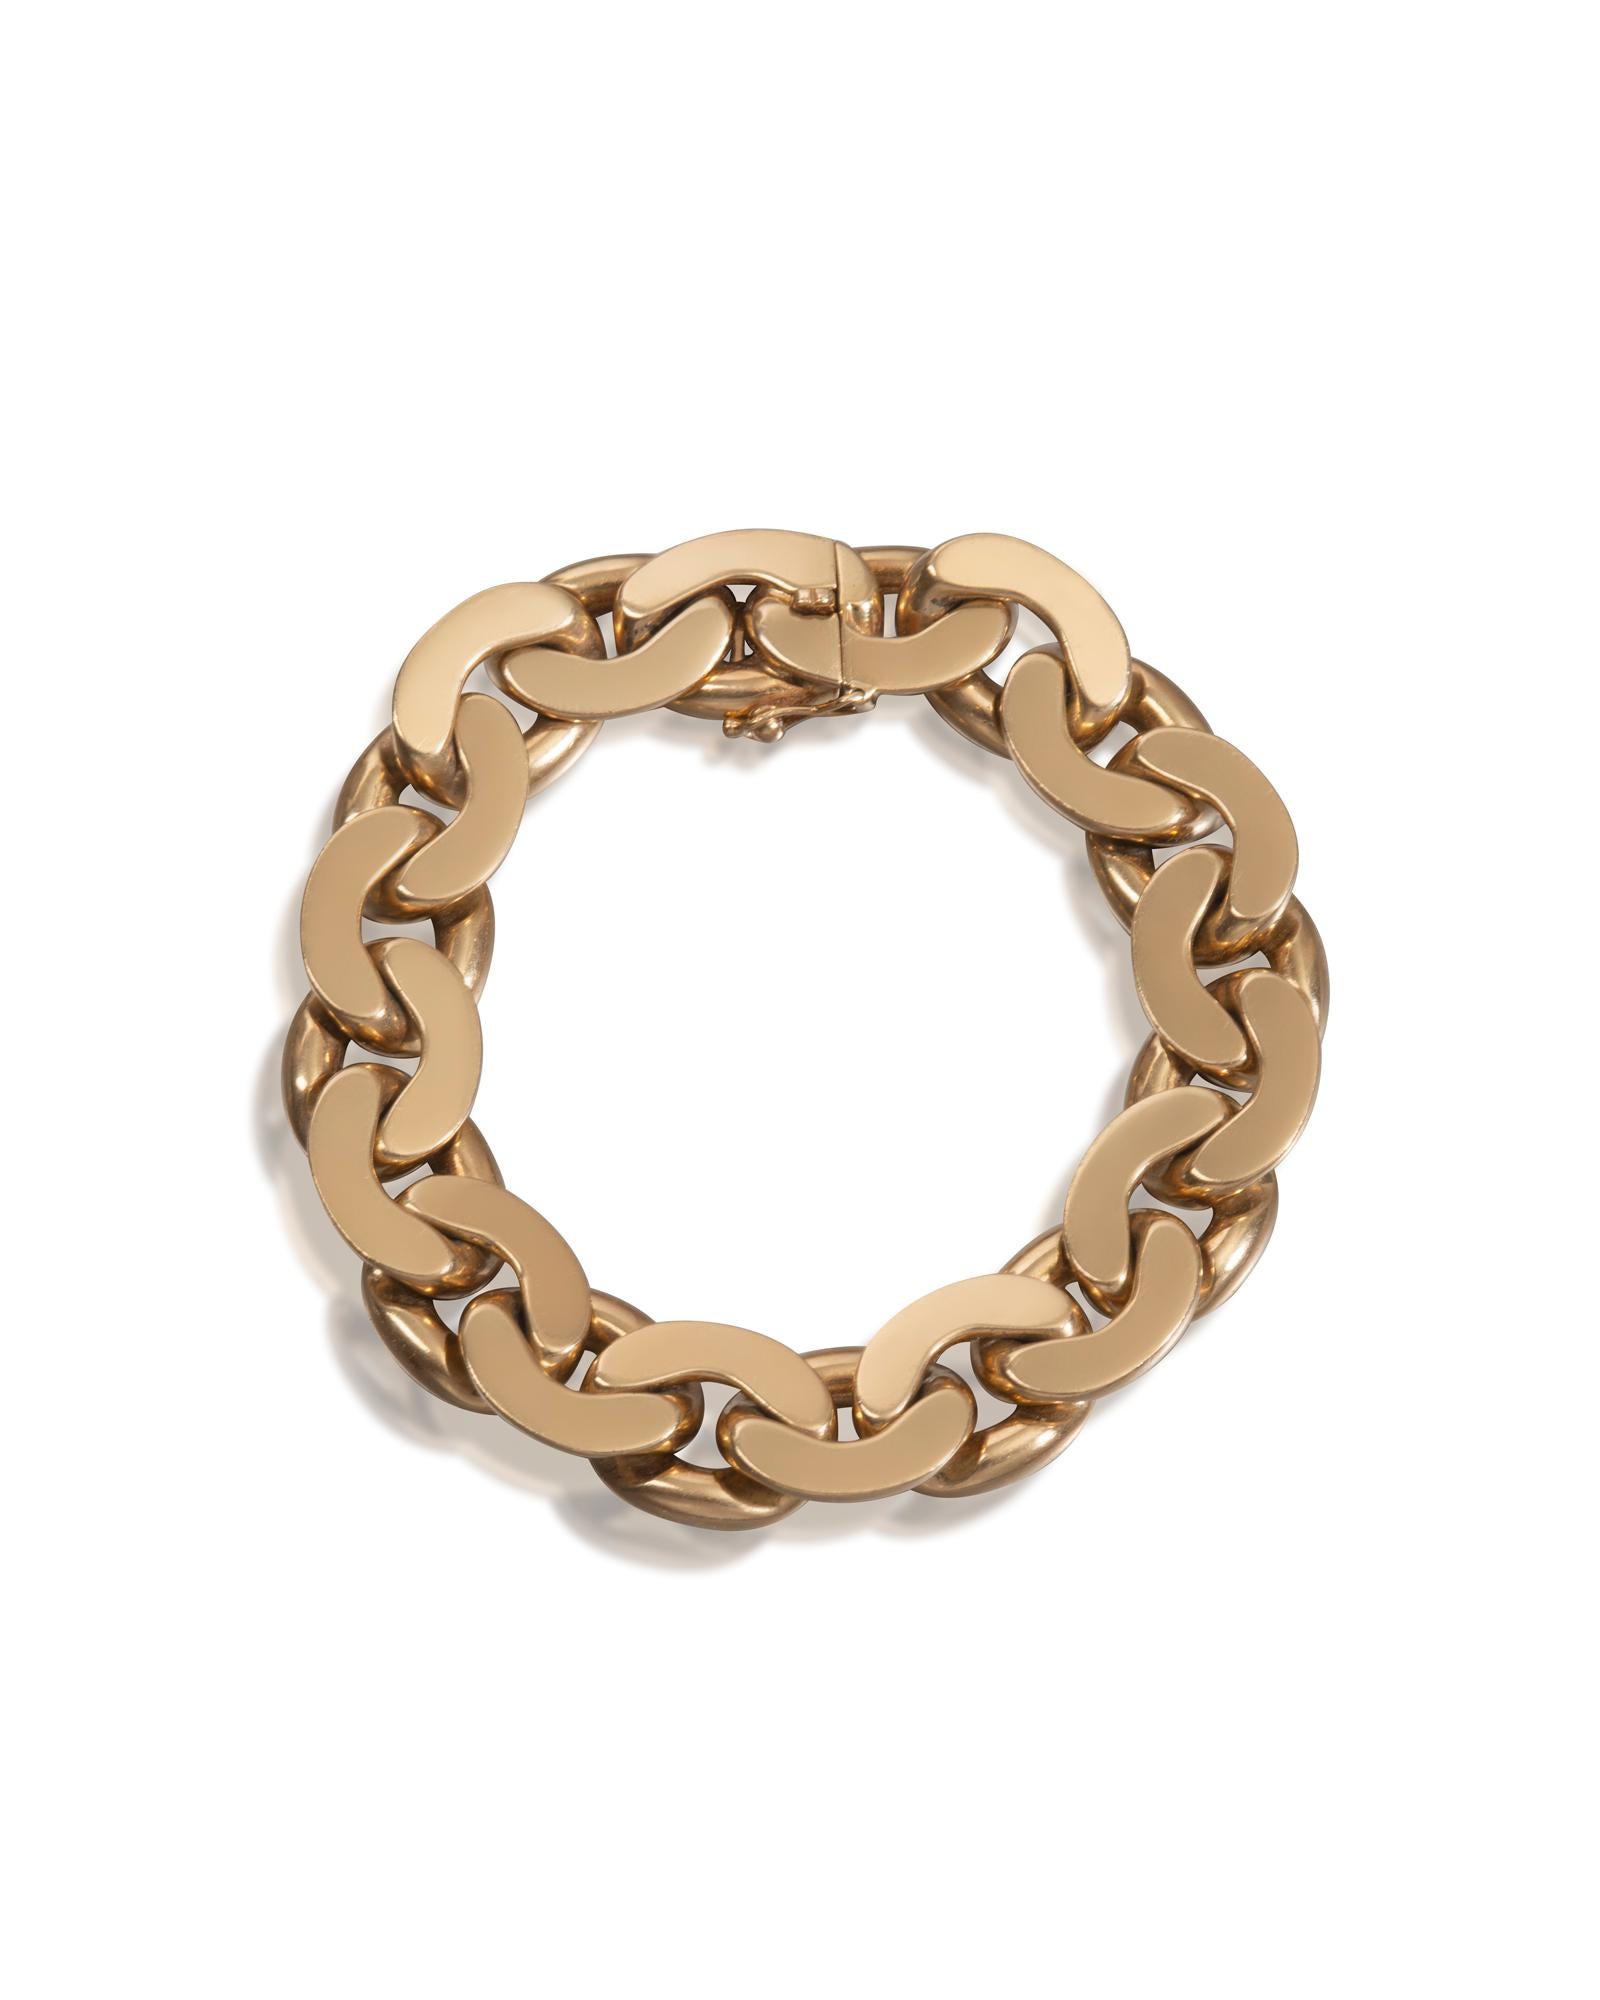 A Retro 18 carat Curb Linked Yellow Gold Bracelet by Boucheron in Original Box
A rare and stylish yellow gold bracelet by Boucheron. The heavy curb linked bracelet is signed and numbered together with makers mark.
The bracelet weighs 130 grams and